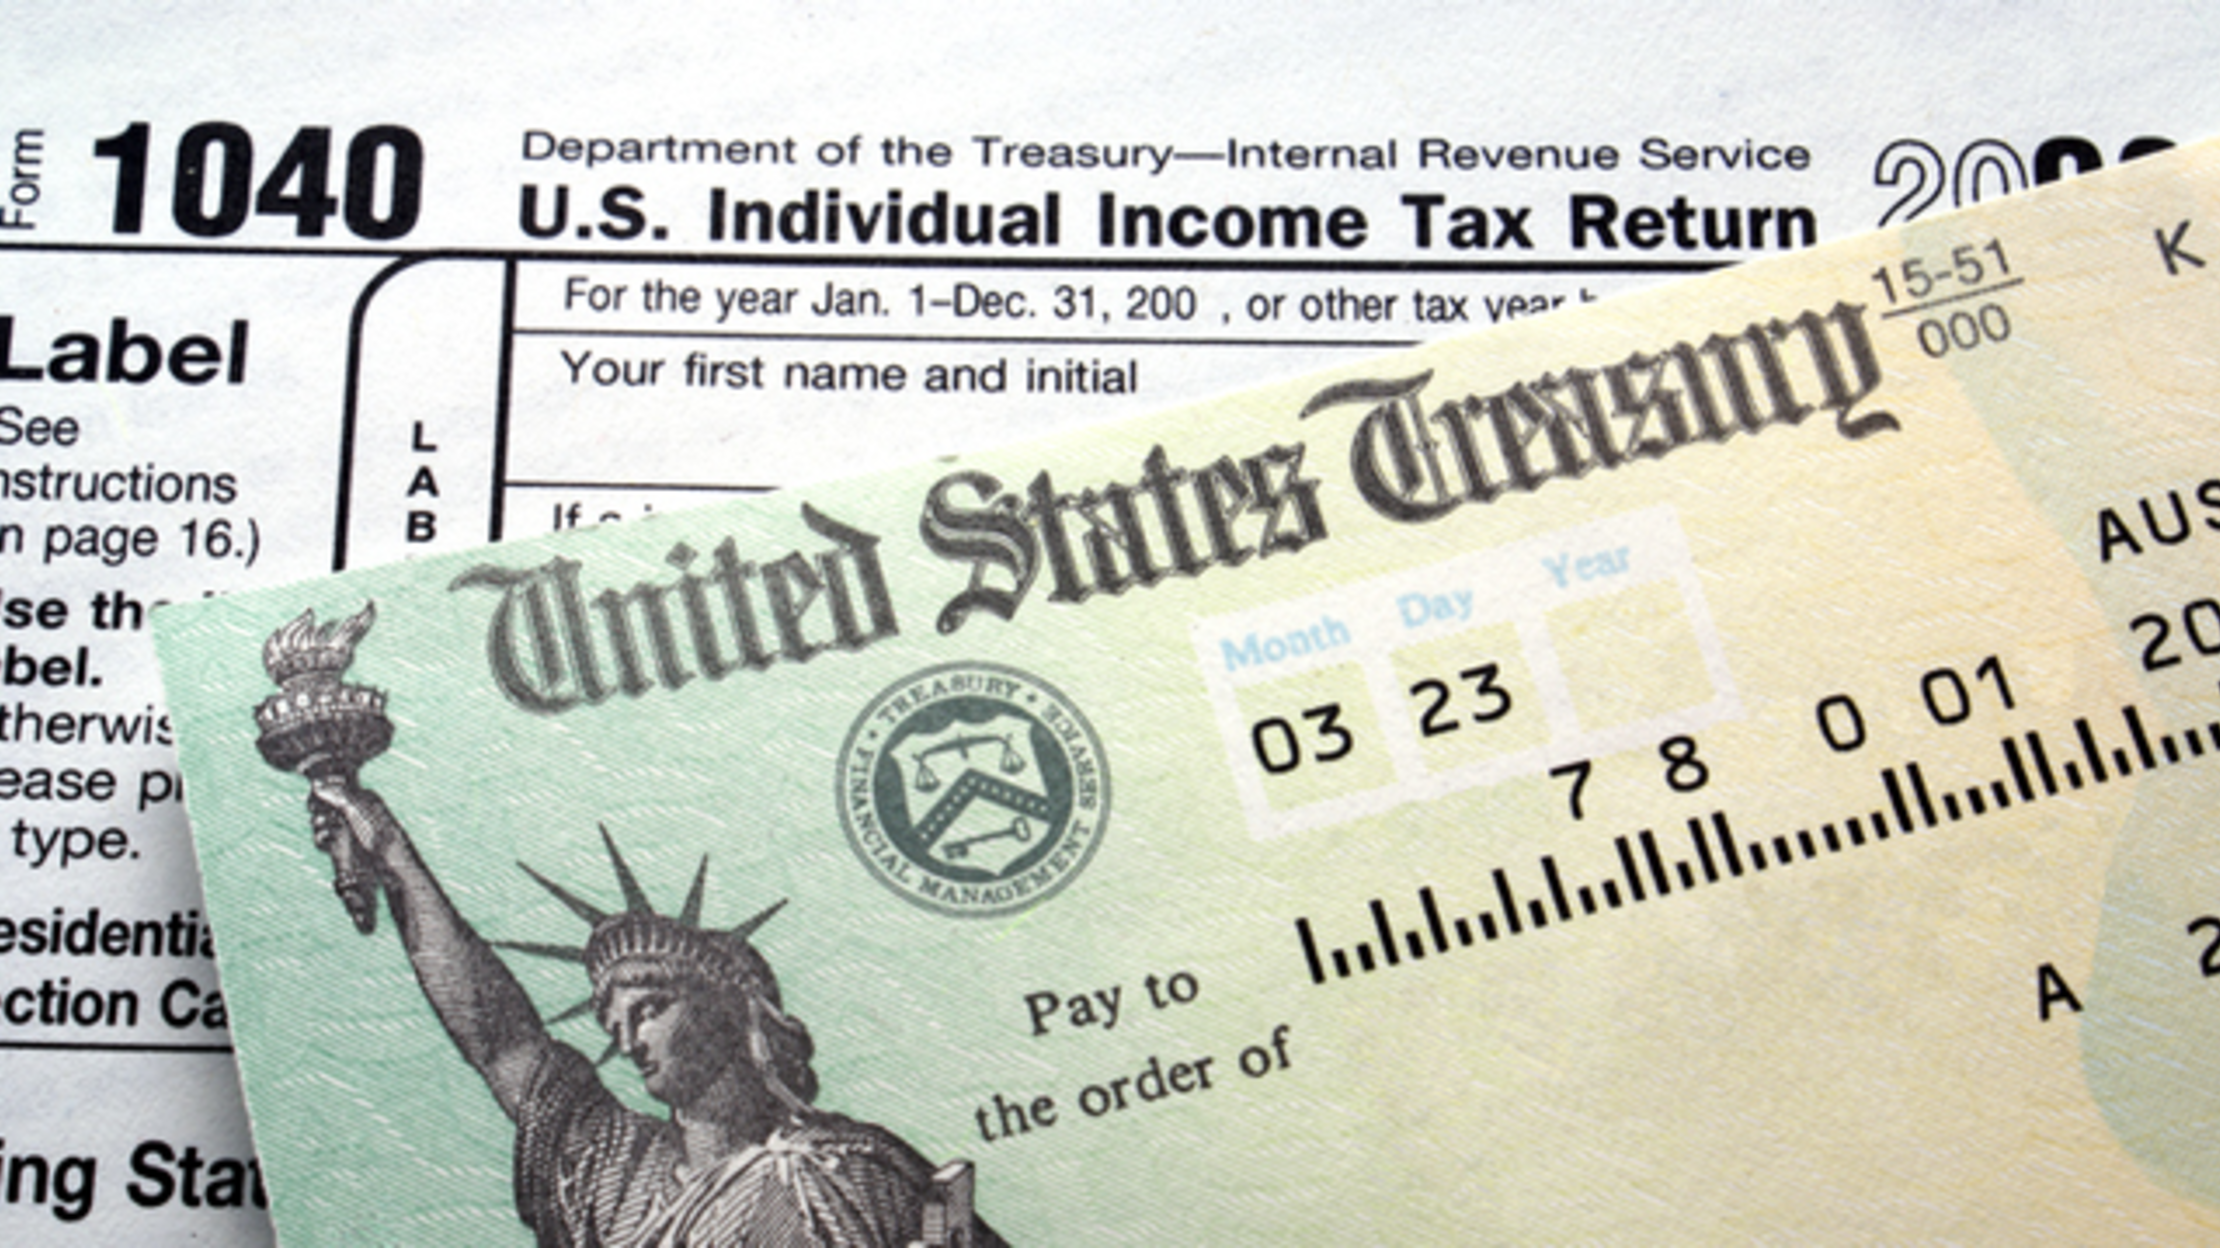 here-s-the-average-irs-tax-refund-amount-by-state-gobankingrates